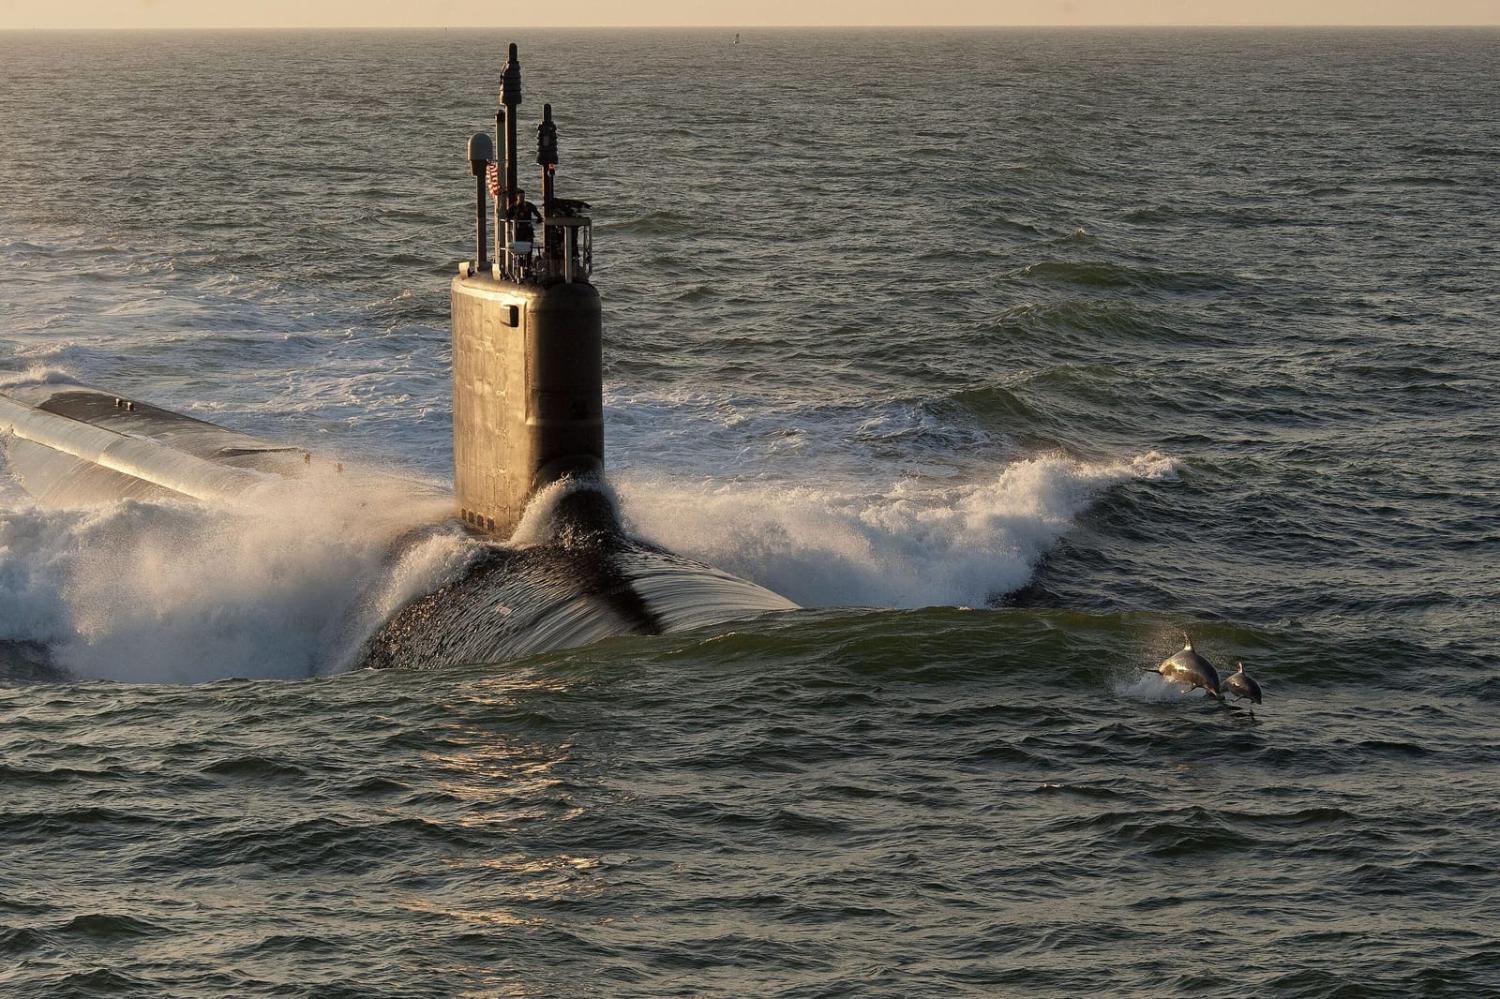 Interest in submarine technology comes amid a growing regional power contest between China and the United States (US Navy/Flickr)